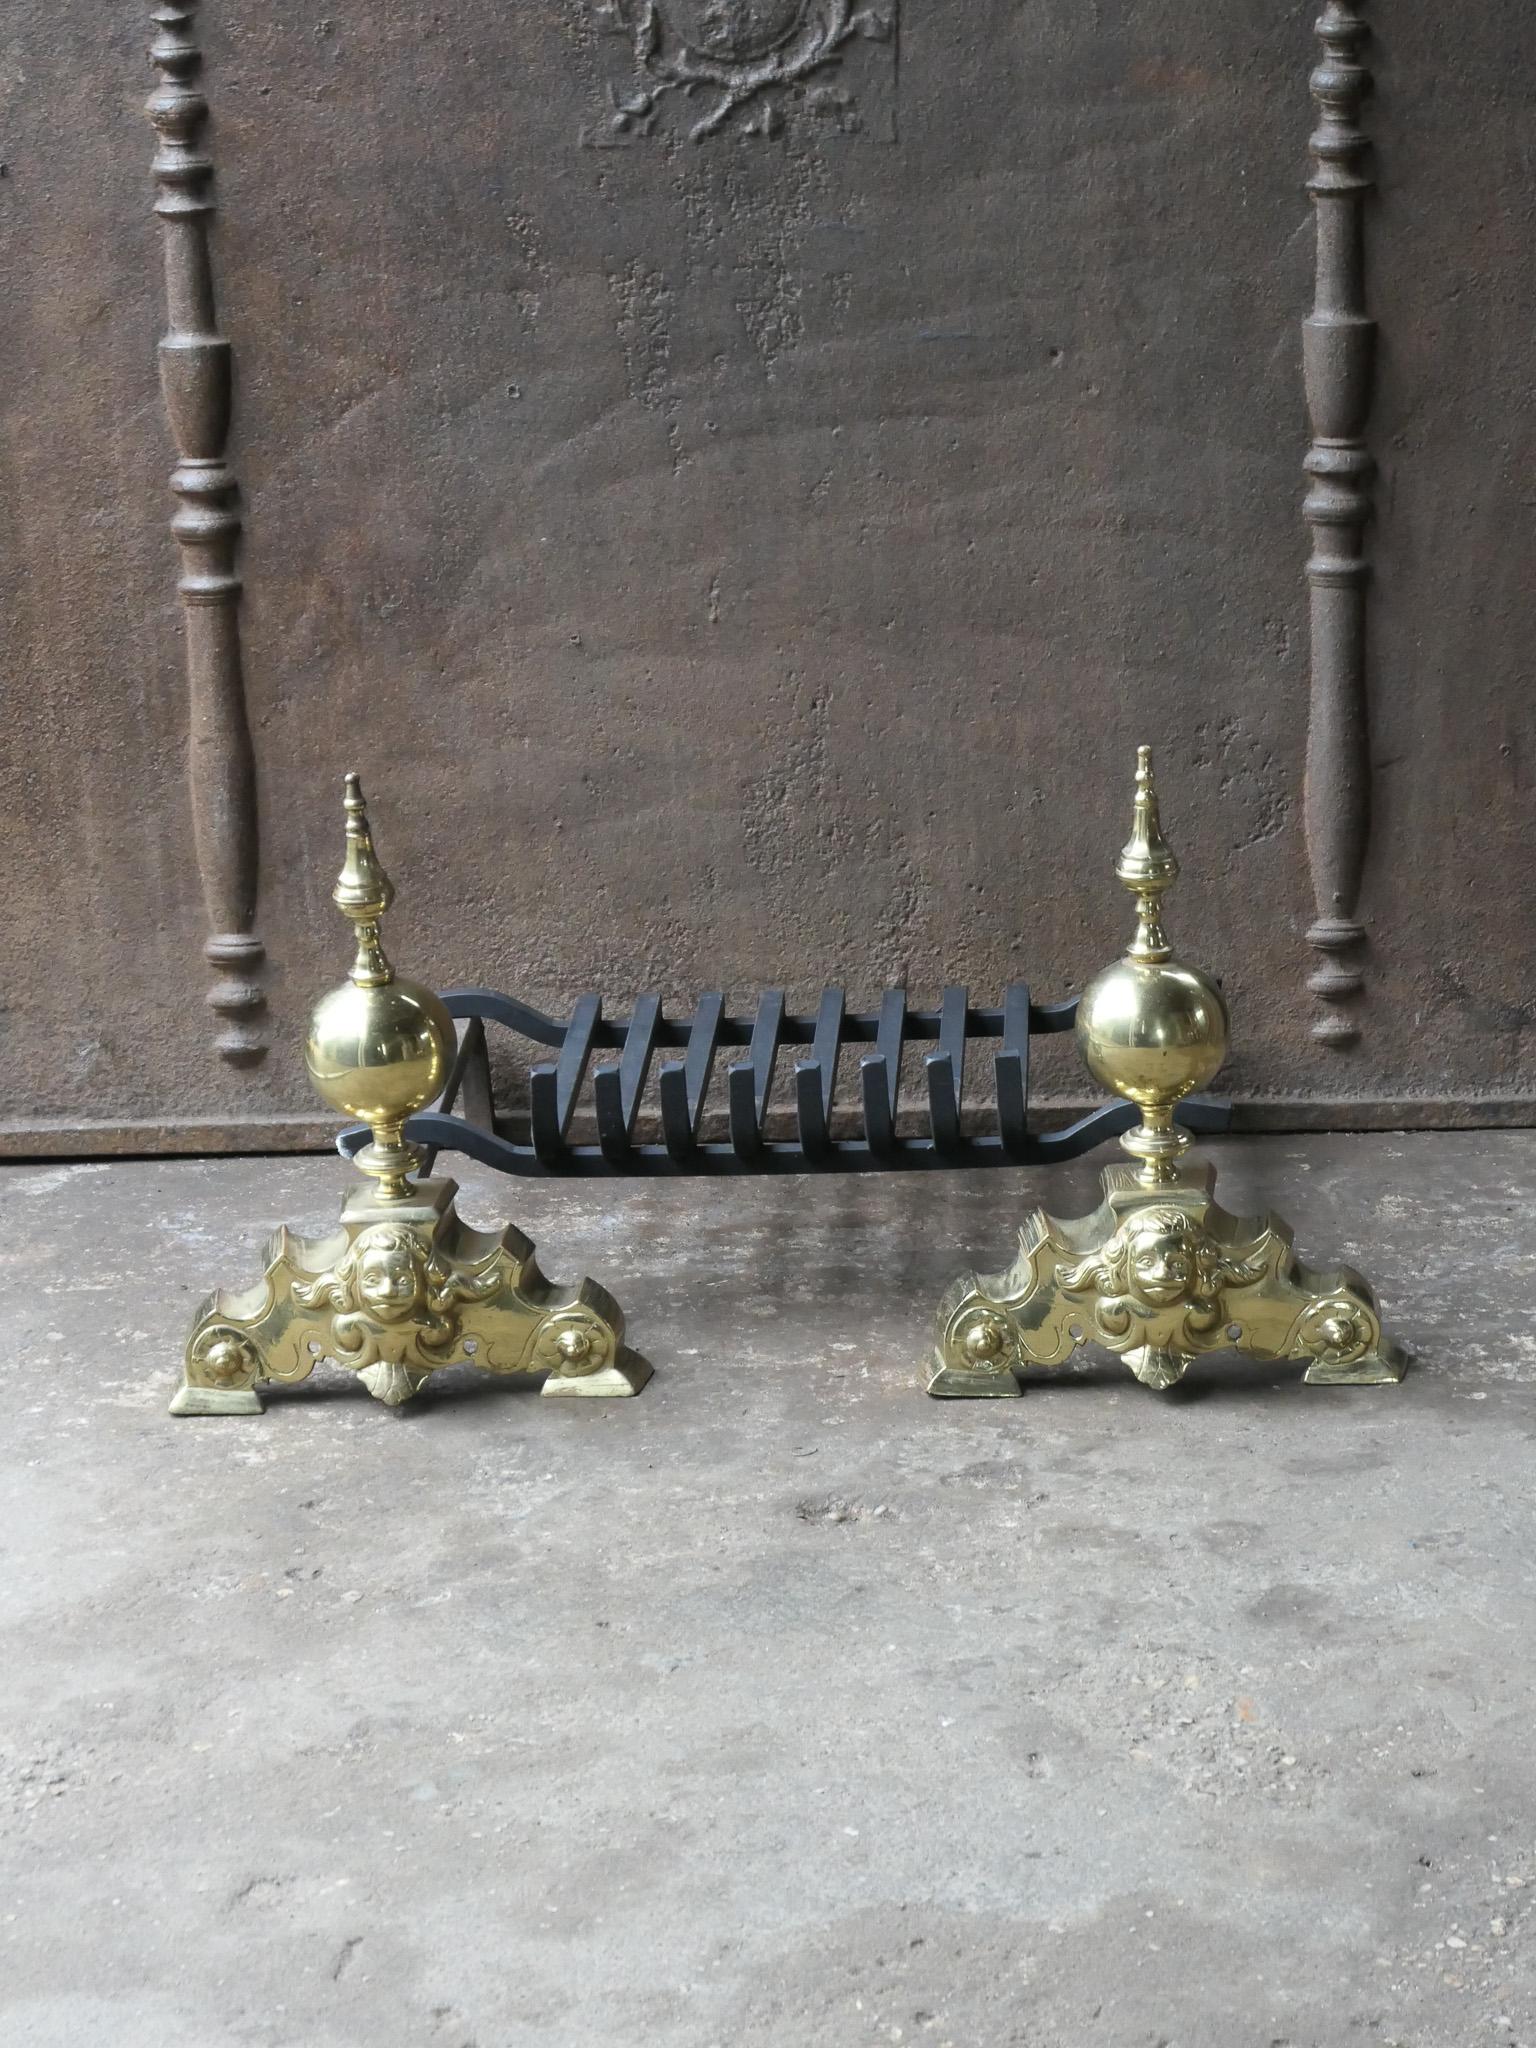 20th century French Louis XIV style fireplace basket - fire basket made of brass and wrought iron. The total width of the front is 27.8 inch (70.5 cm)

The basket is in a good condition and is fully functional.